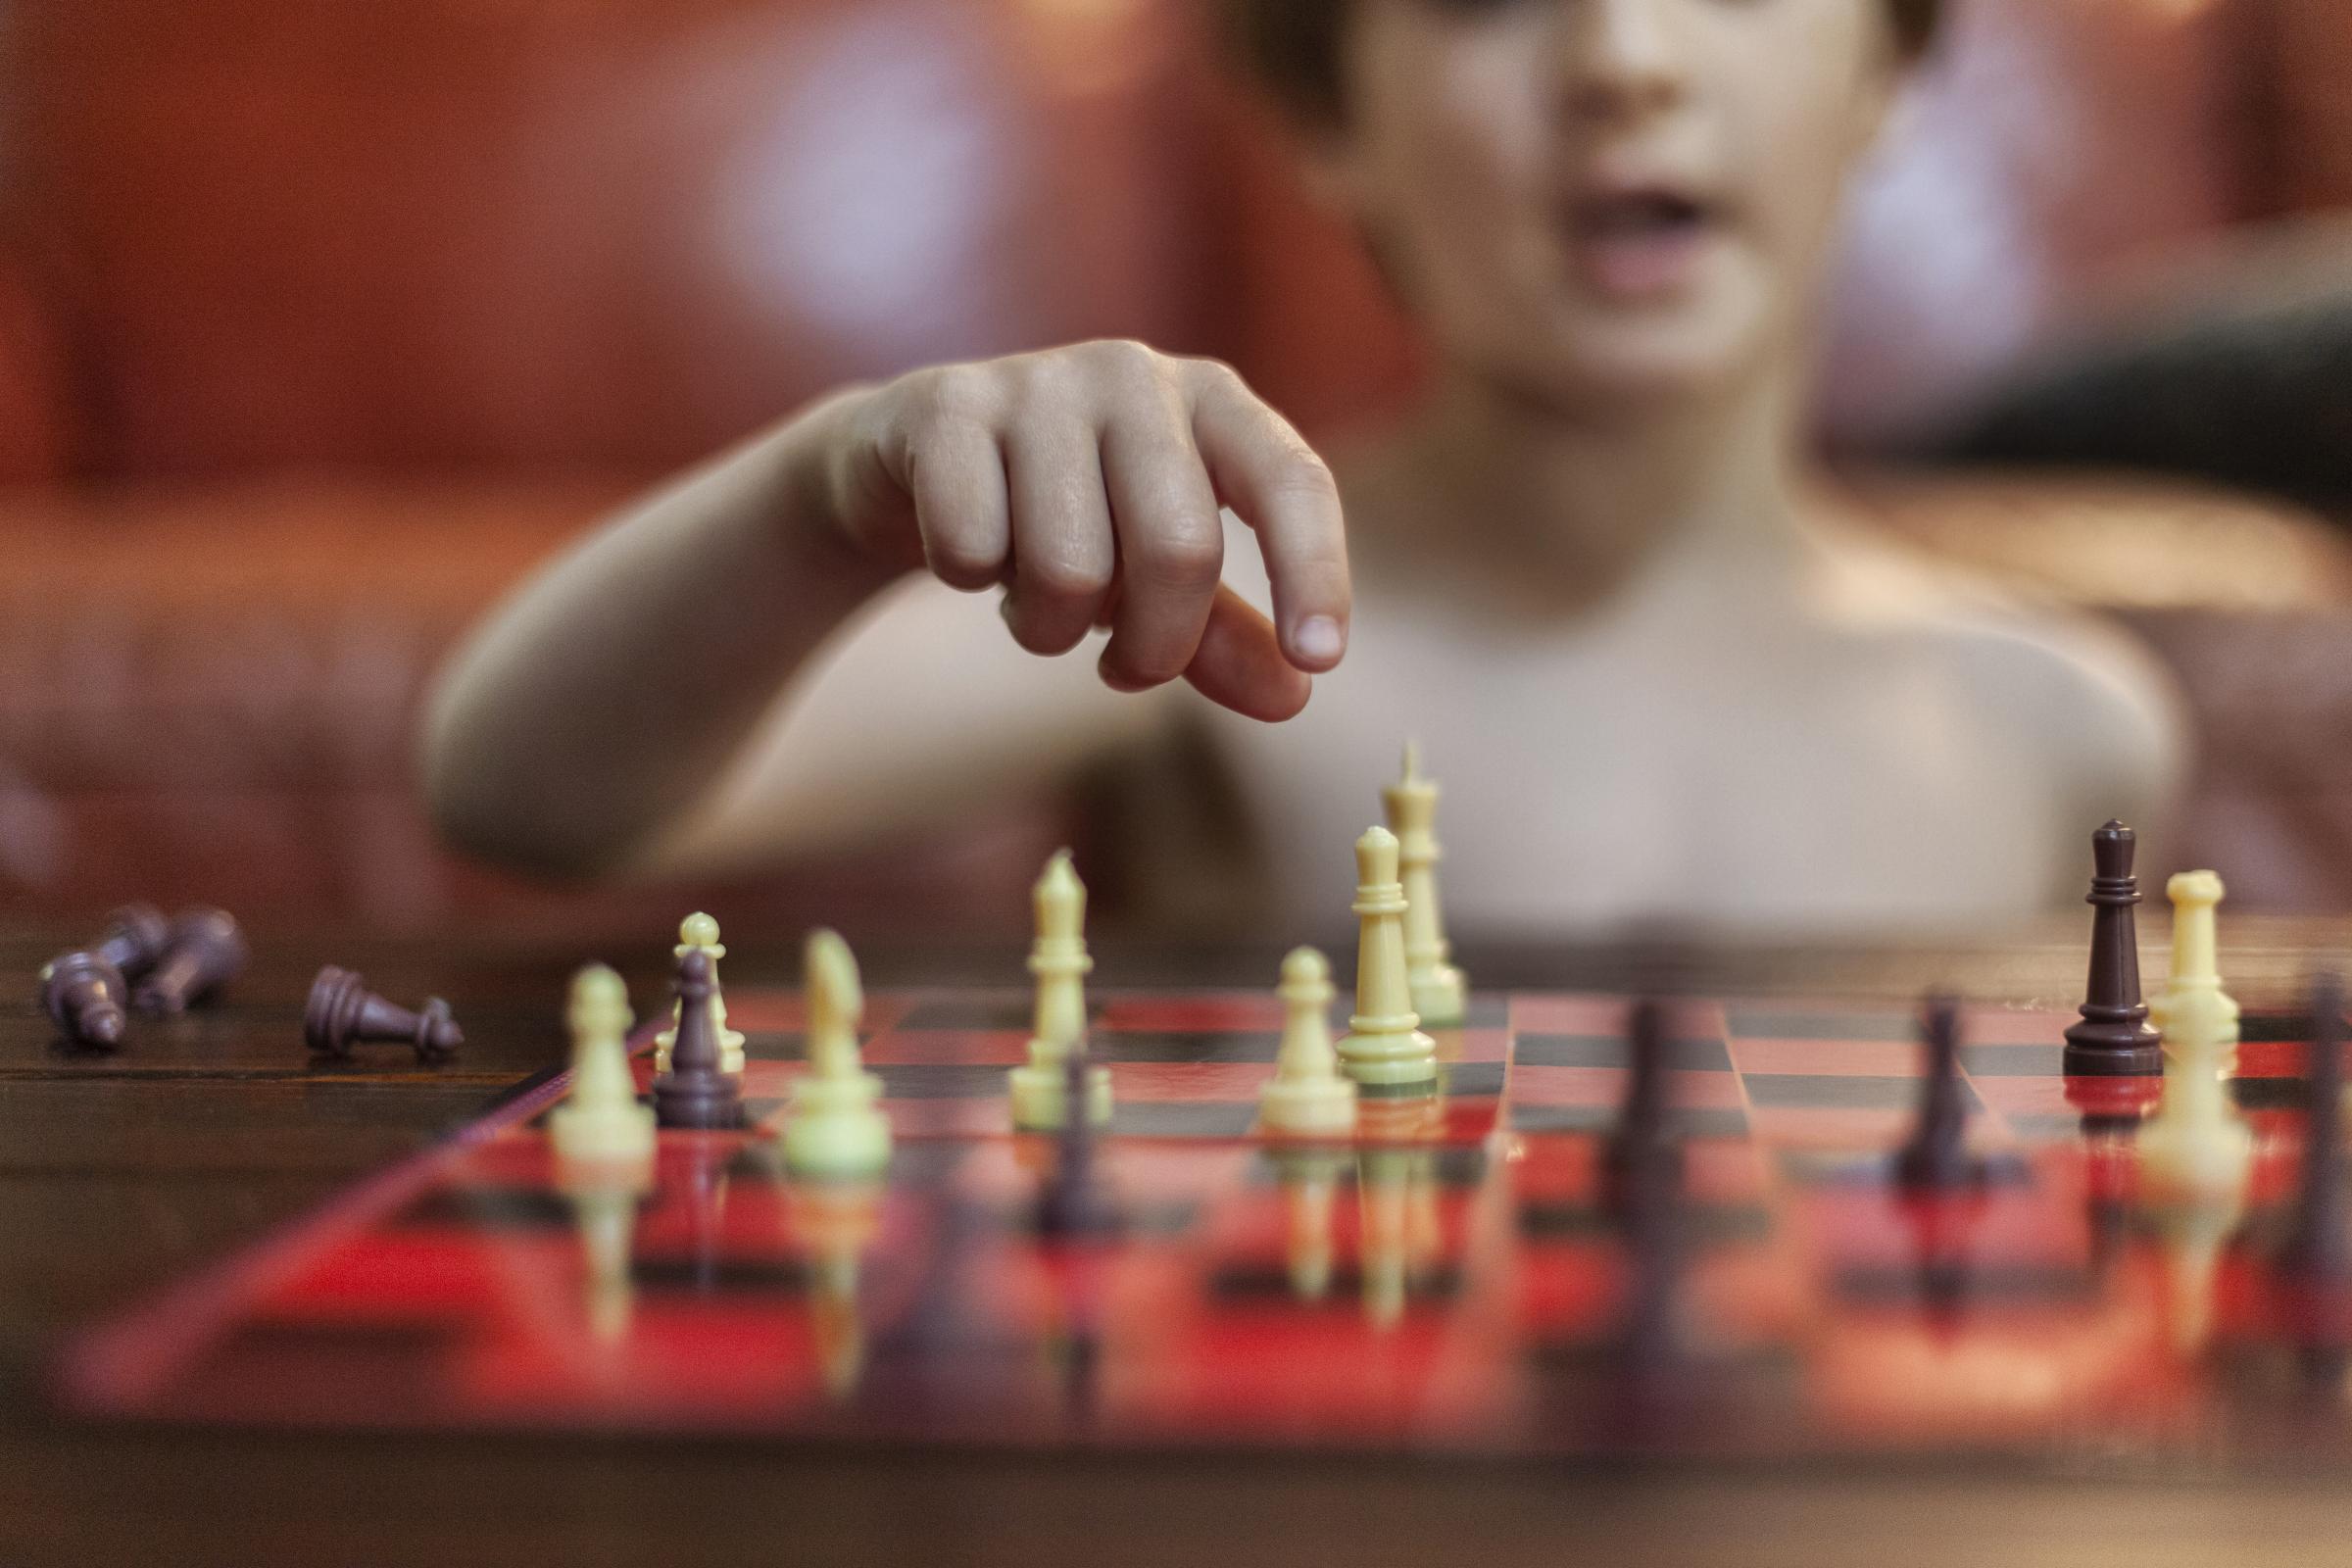 Growing Up - The benefits of teaching chess to youth include...